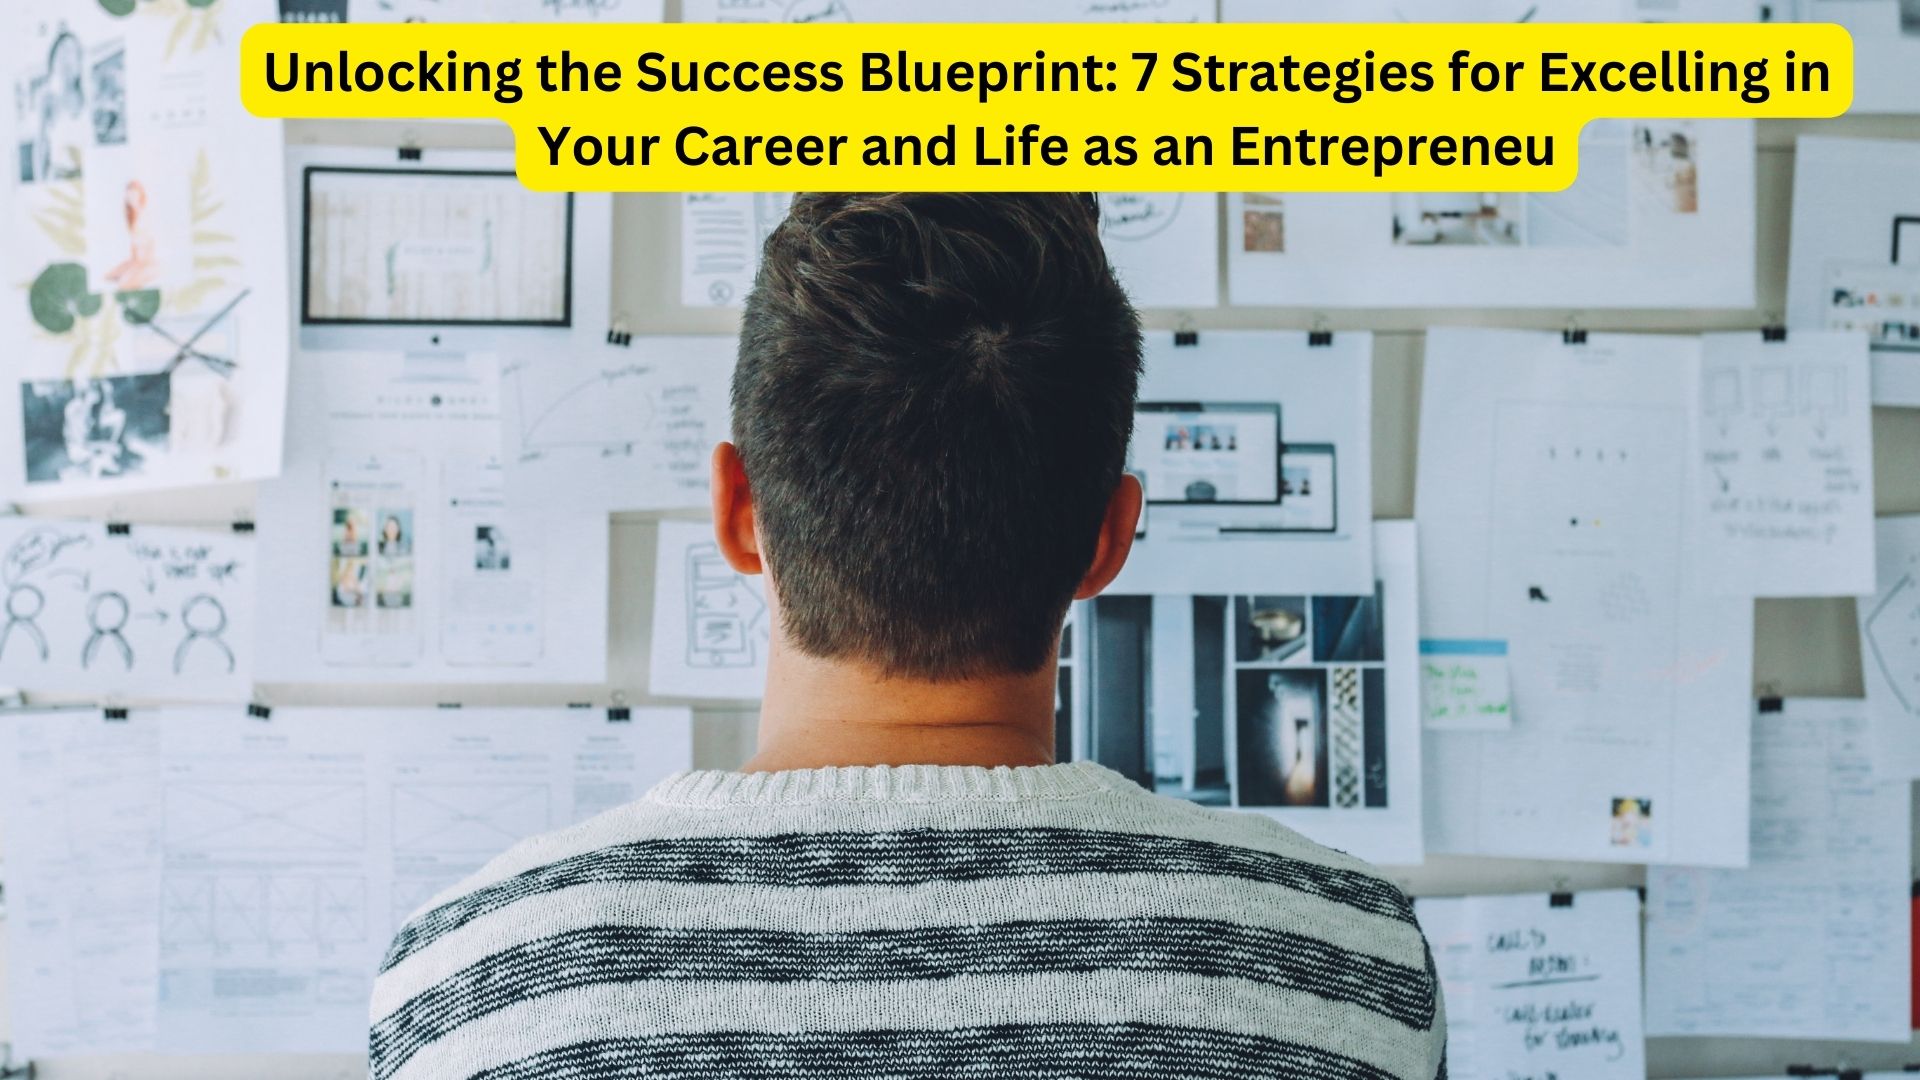 Unlocking the Success Blueprint: 7 Strategies for Excelling in Your Career and Life as an Entrepreneur